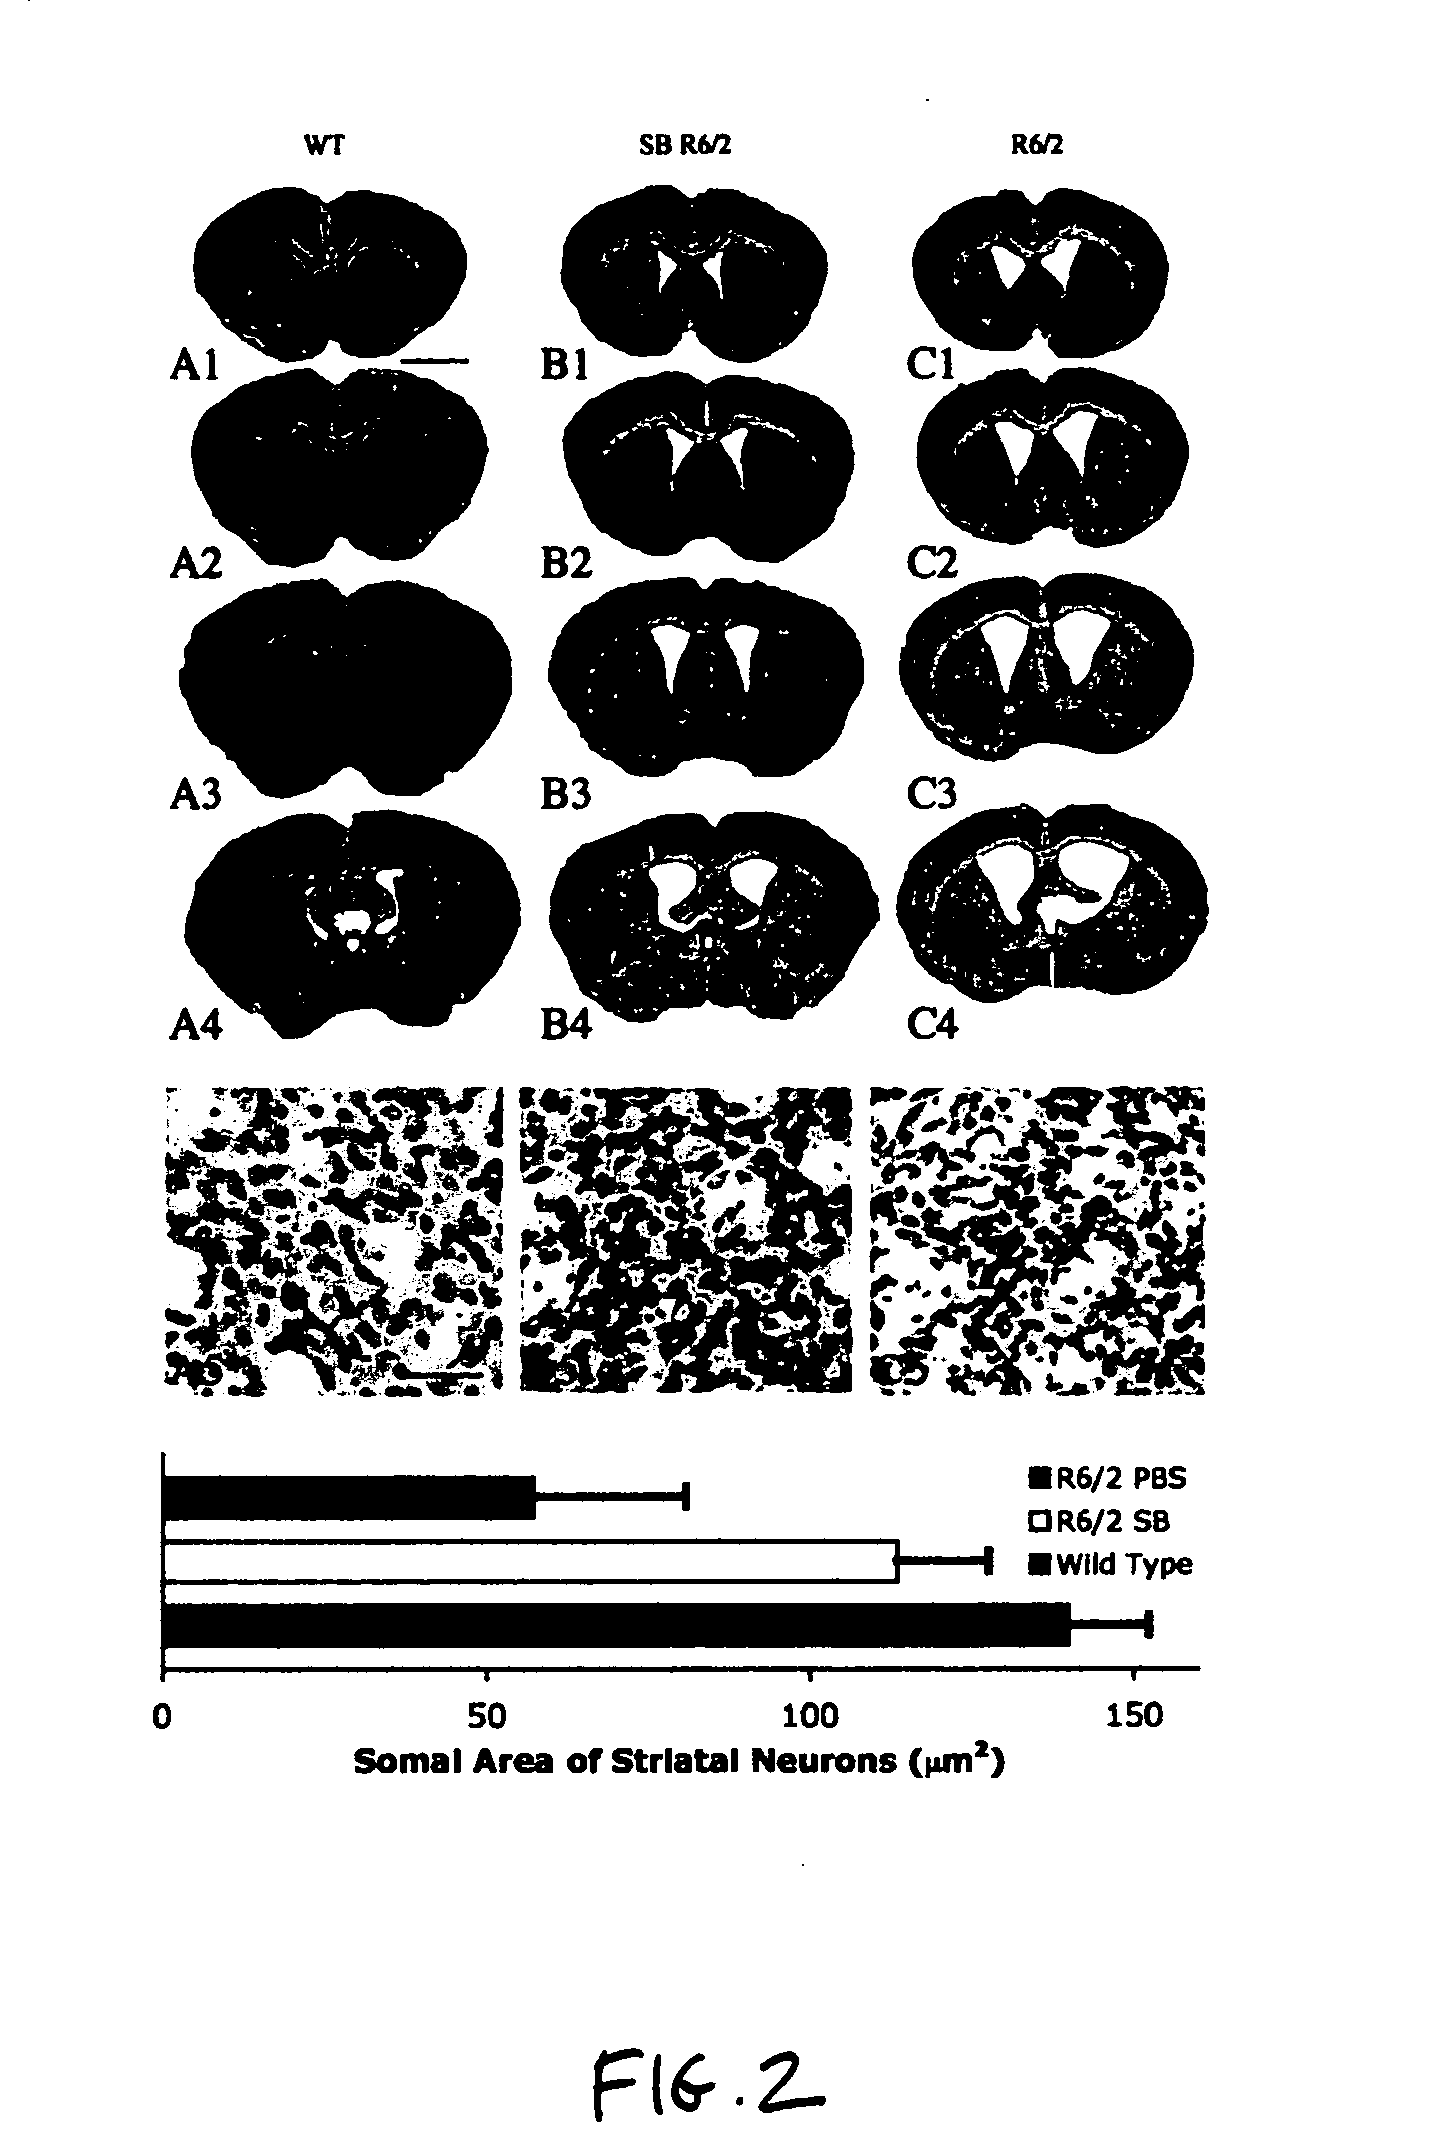 Method of ameliorating or abrogating the effects of a neurodegenerative disorder, such as Huntington's disease, by sodium butyrate chemotherapy